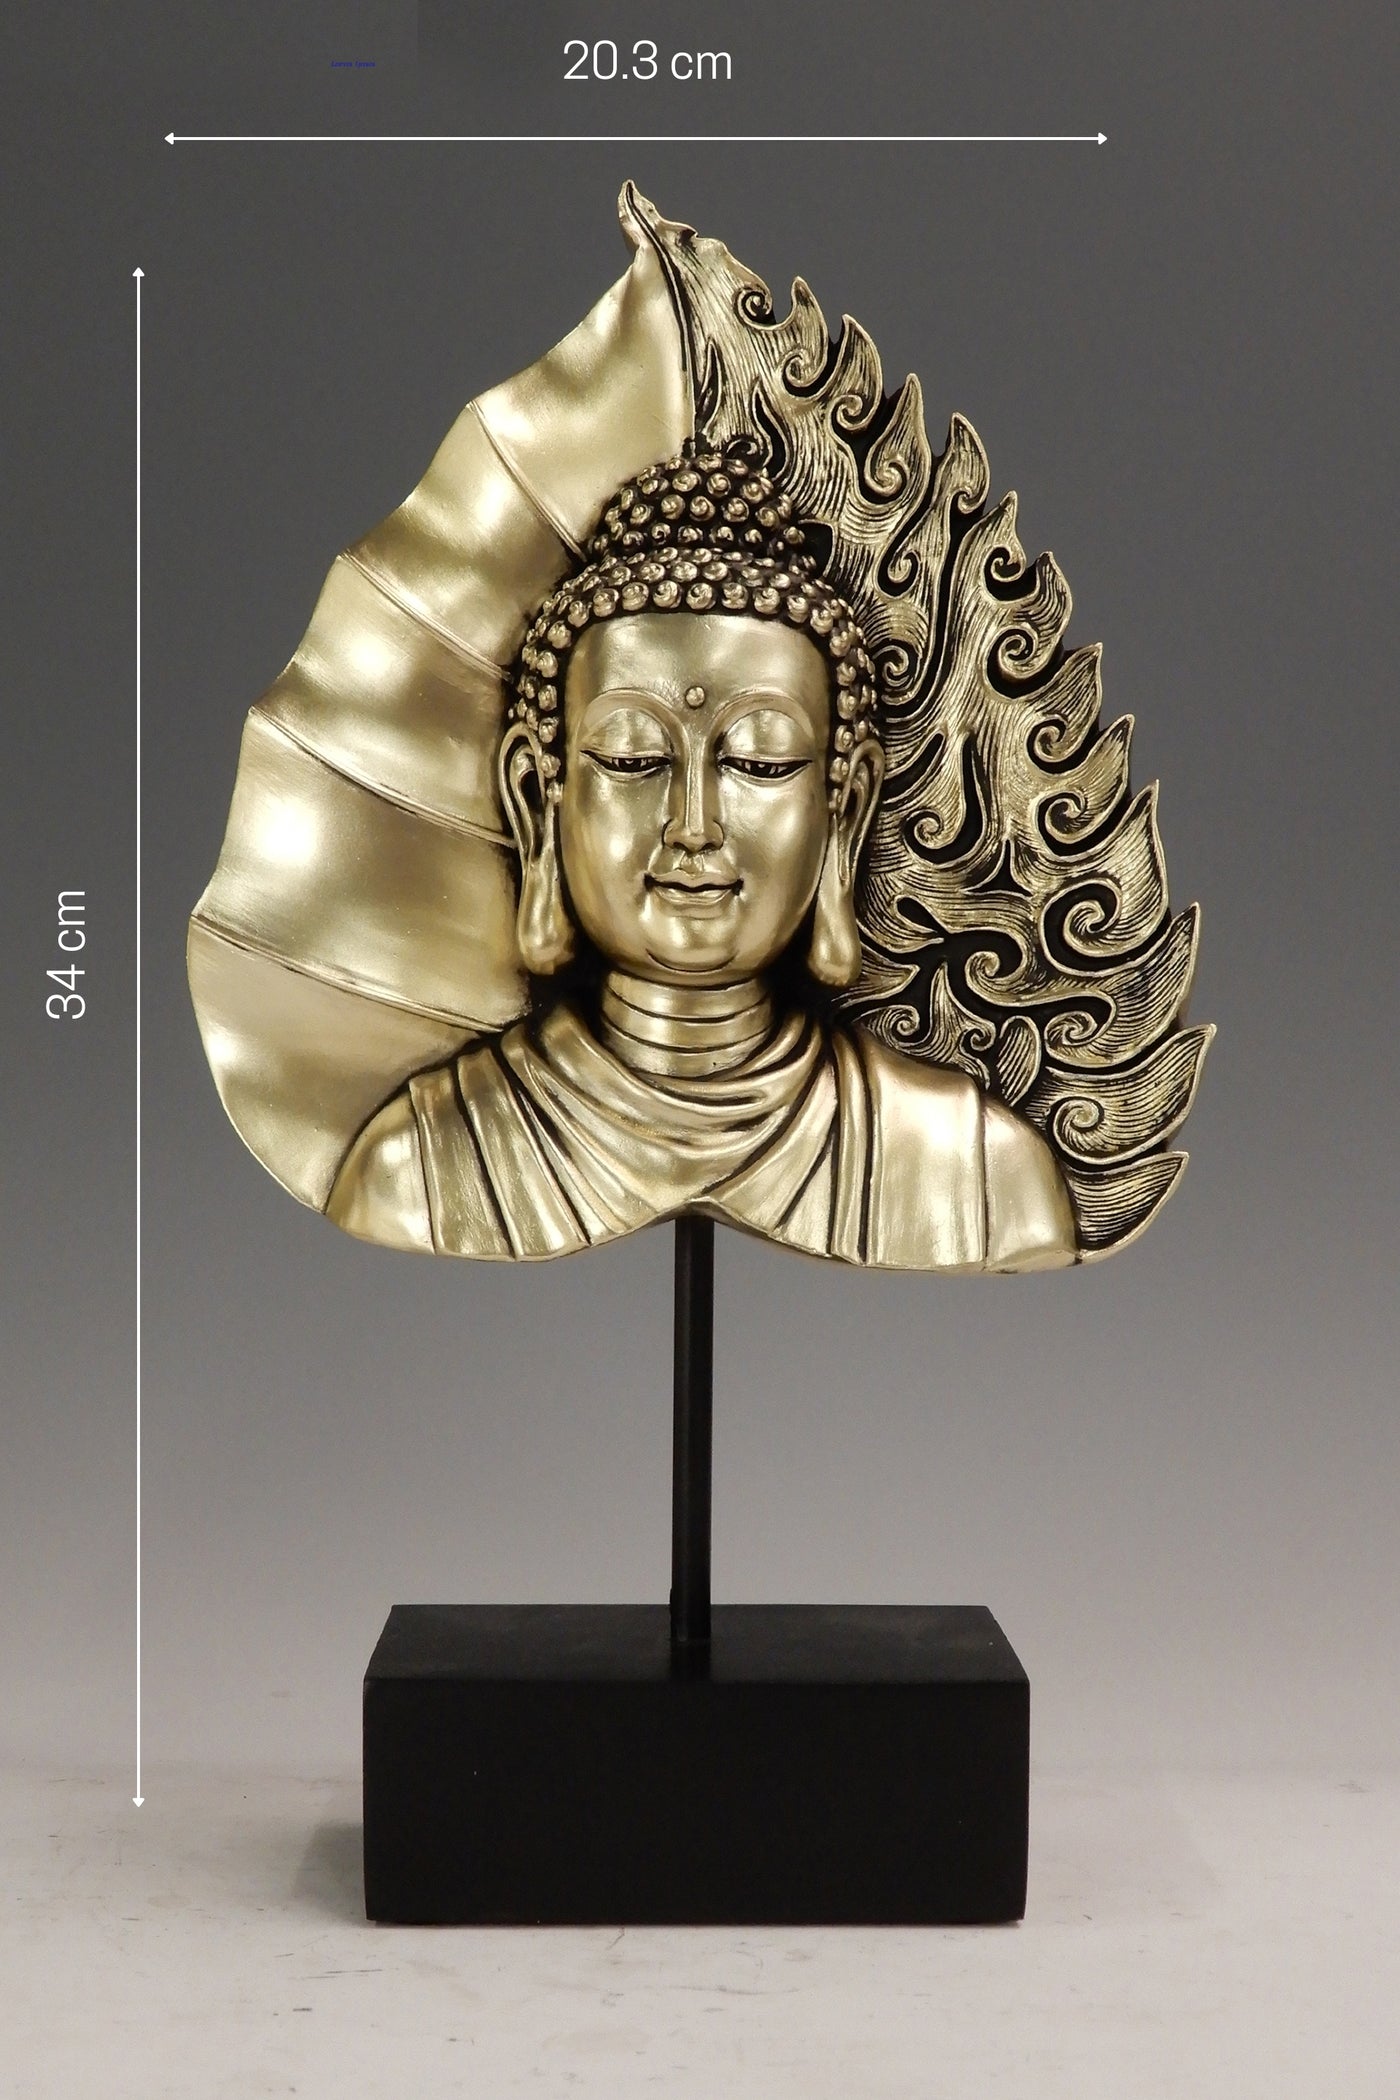 Buddha's face in Leaf on the black base for your home or office decor